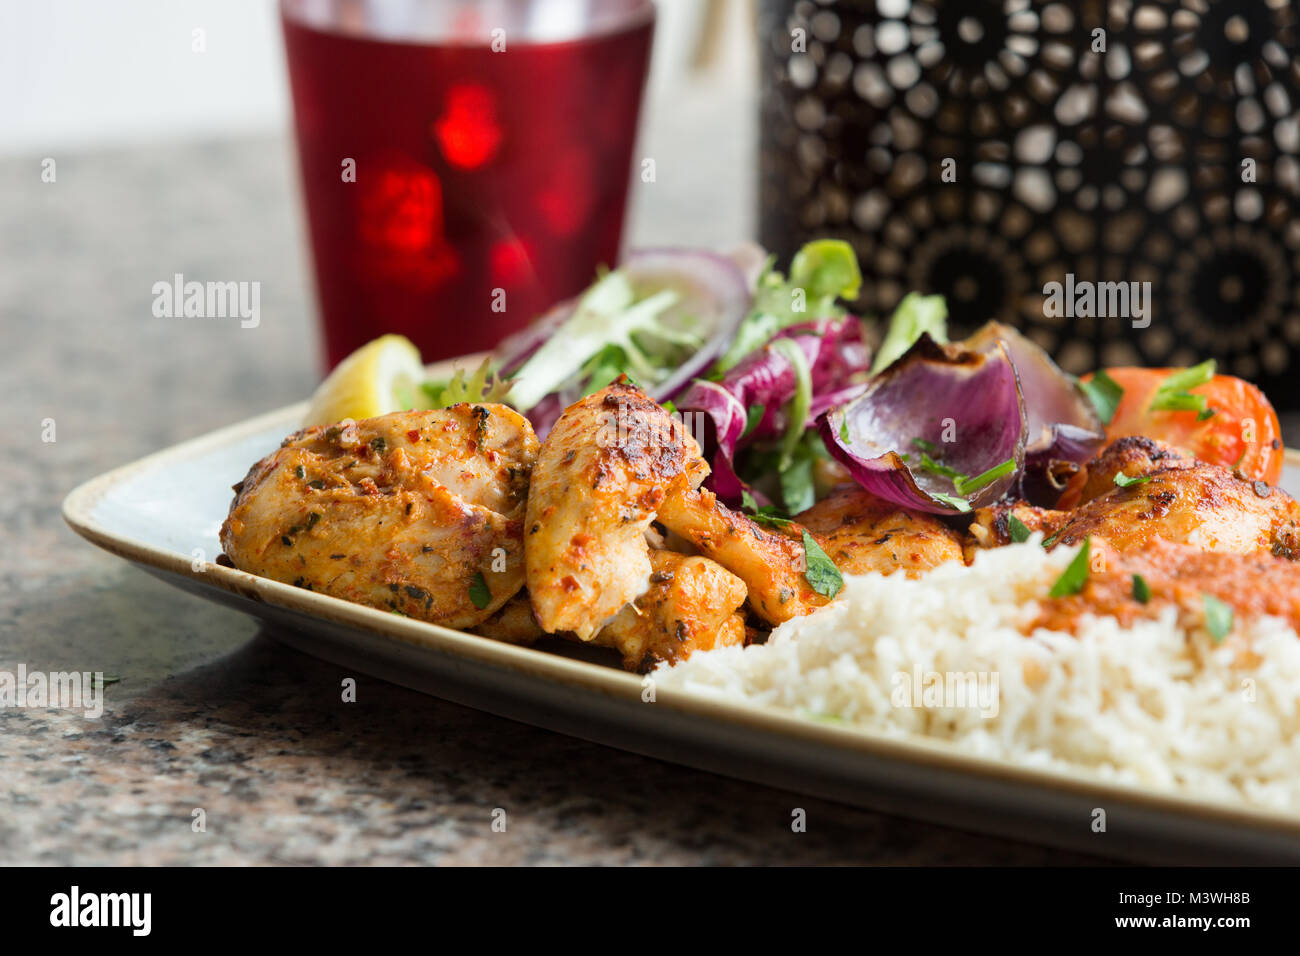 Moroccan mixed grill Stock Photo